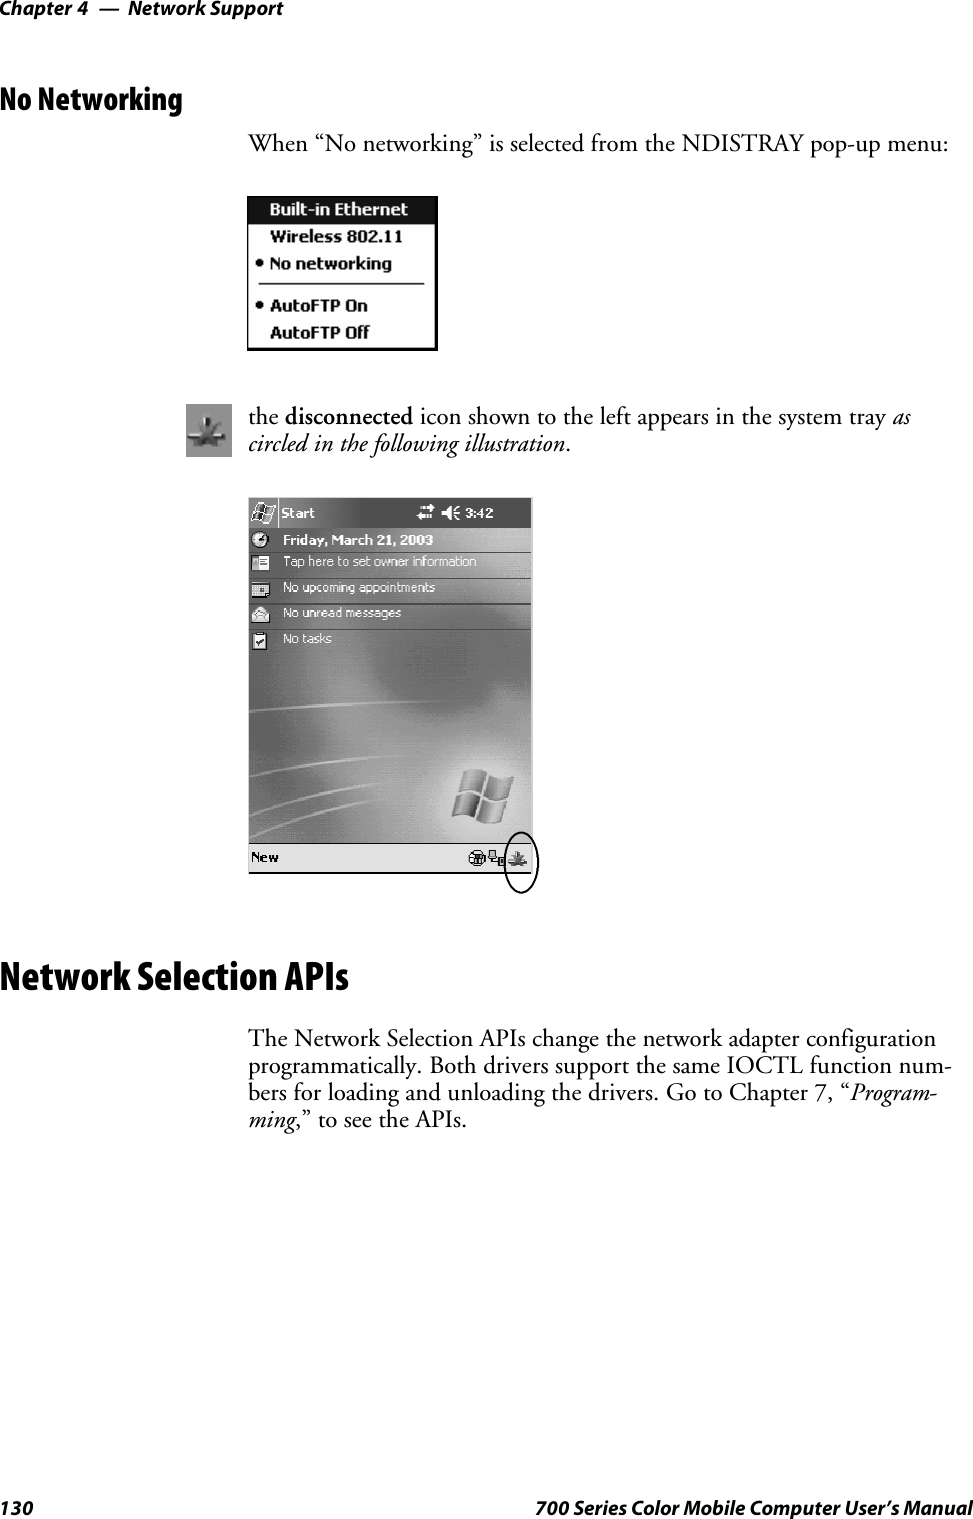 Network SupportChapter —4130 700 Series Color Mobile Computer User’s ManualNo NetworkingWhen “No networking” is selected from the NDISTRAY pop-up menu:the disconnected icon shown to the left appears in the system tray ascircled in the following illustration.Network Selection APIsThe Network Selection APIs change the network adapter configurationprogrammatically. Both drivers support the same IOCTL function num-bers for loading and unloading the drivers. Go to Chapter 7, “Program-ming,” to see the APIs.